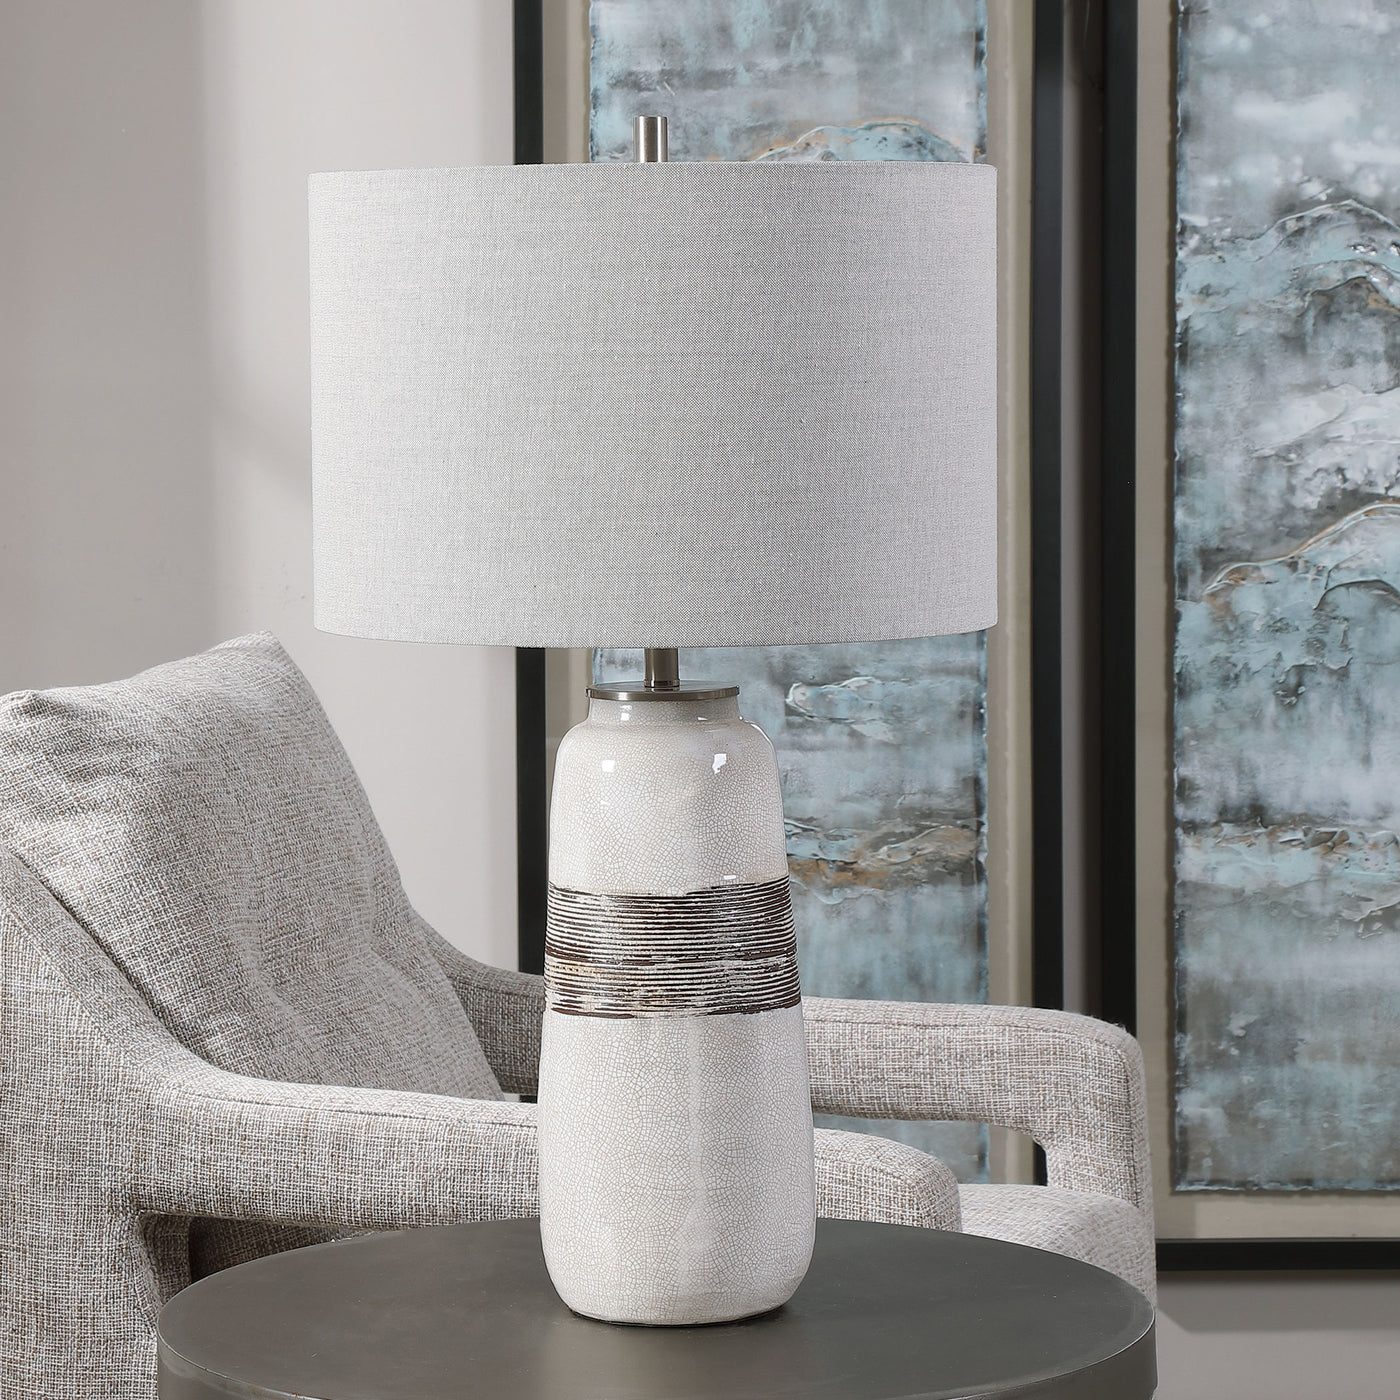 Showcasing A Rustic Casual Look, This Ceramic Table Lamp Features An Off-white Crackle Glaze With Distressed Rust Brown De...